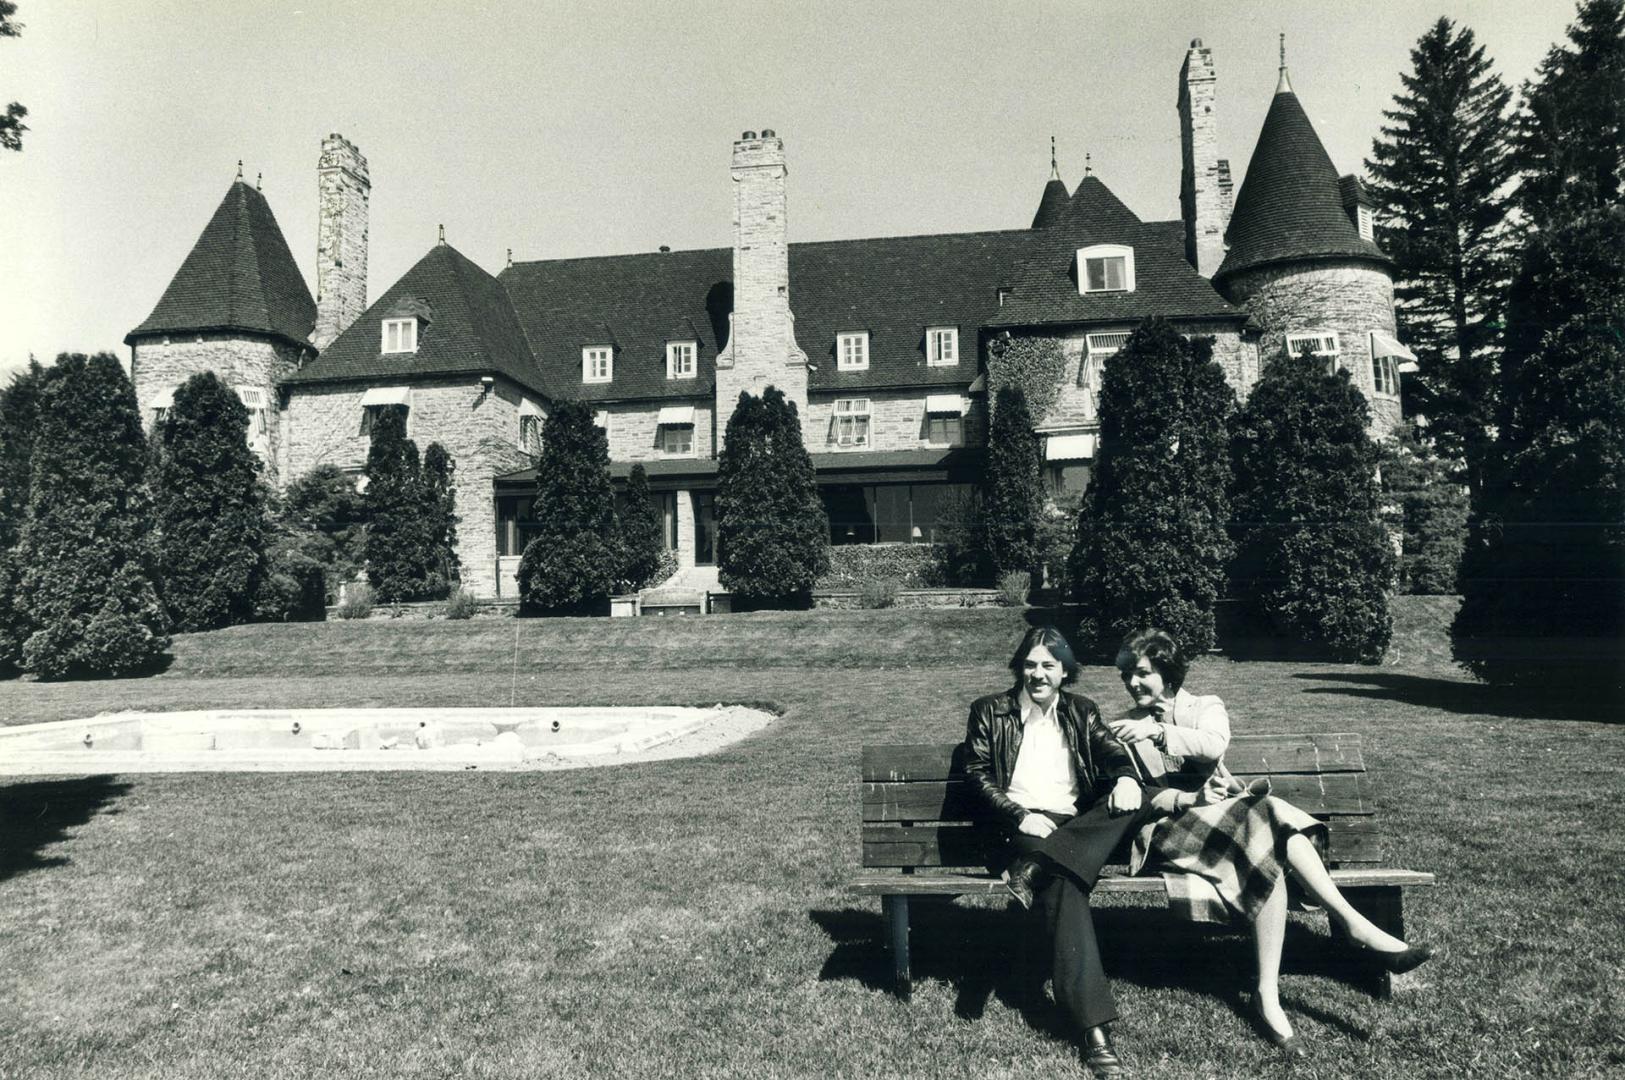 A unique hotel, operated by students learning the service trades, occupies the Norman chateau-style mansion built in the late 1930s as a retirement ho(...)